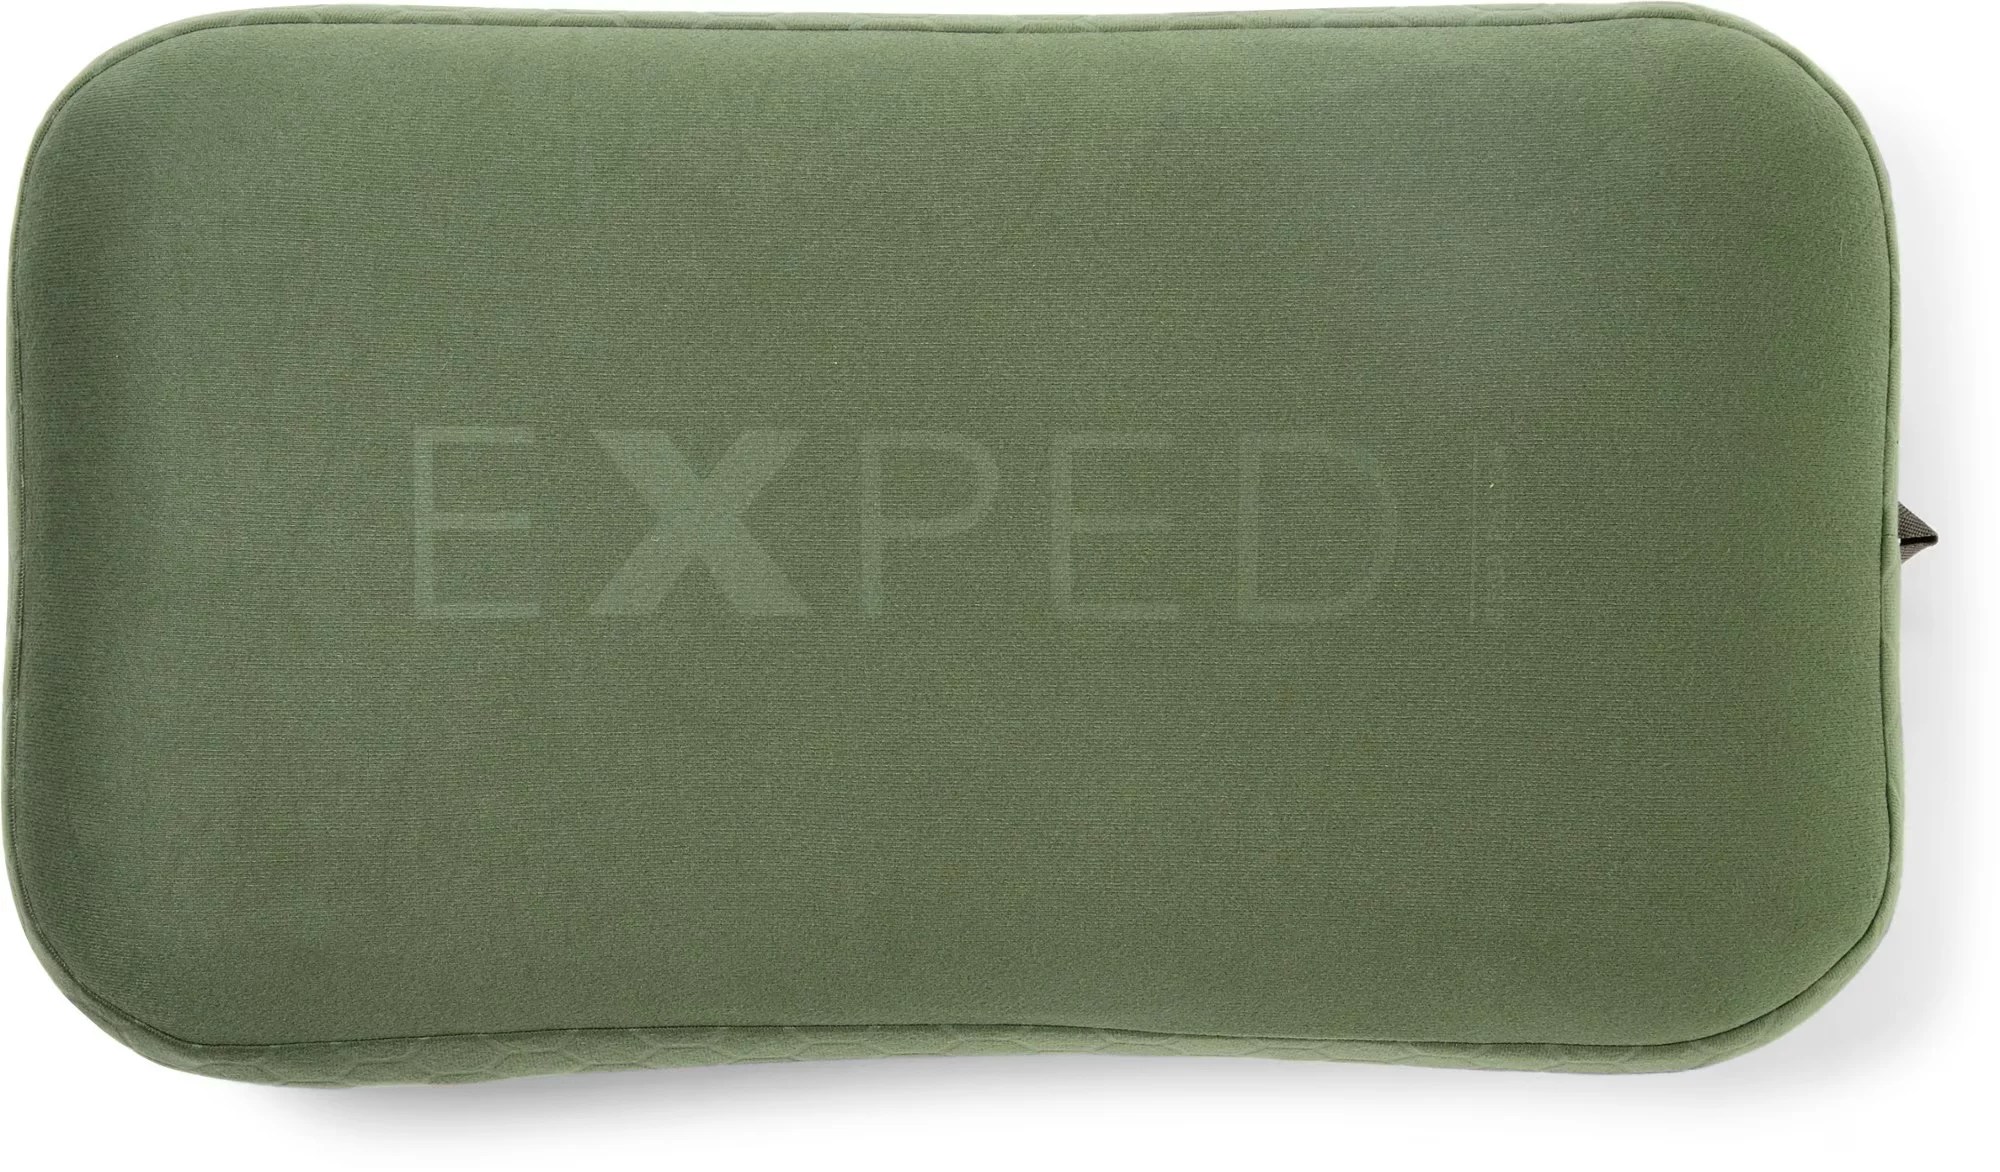 exped sleeping pillow, one of the best things you can buy from REI